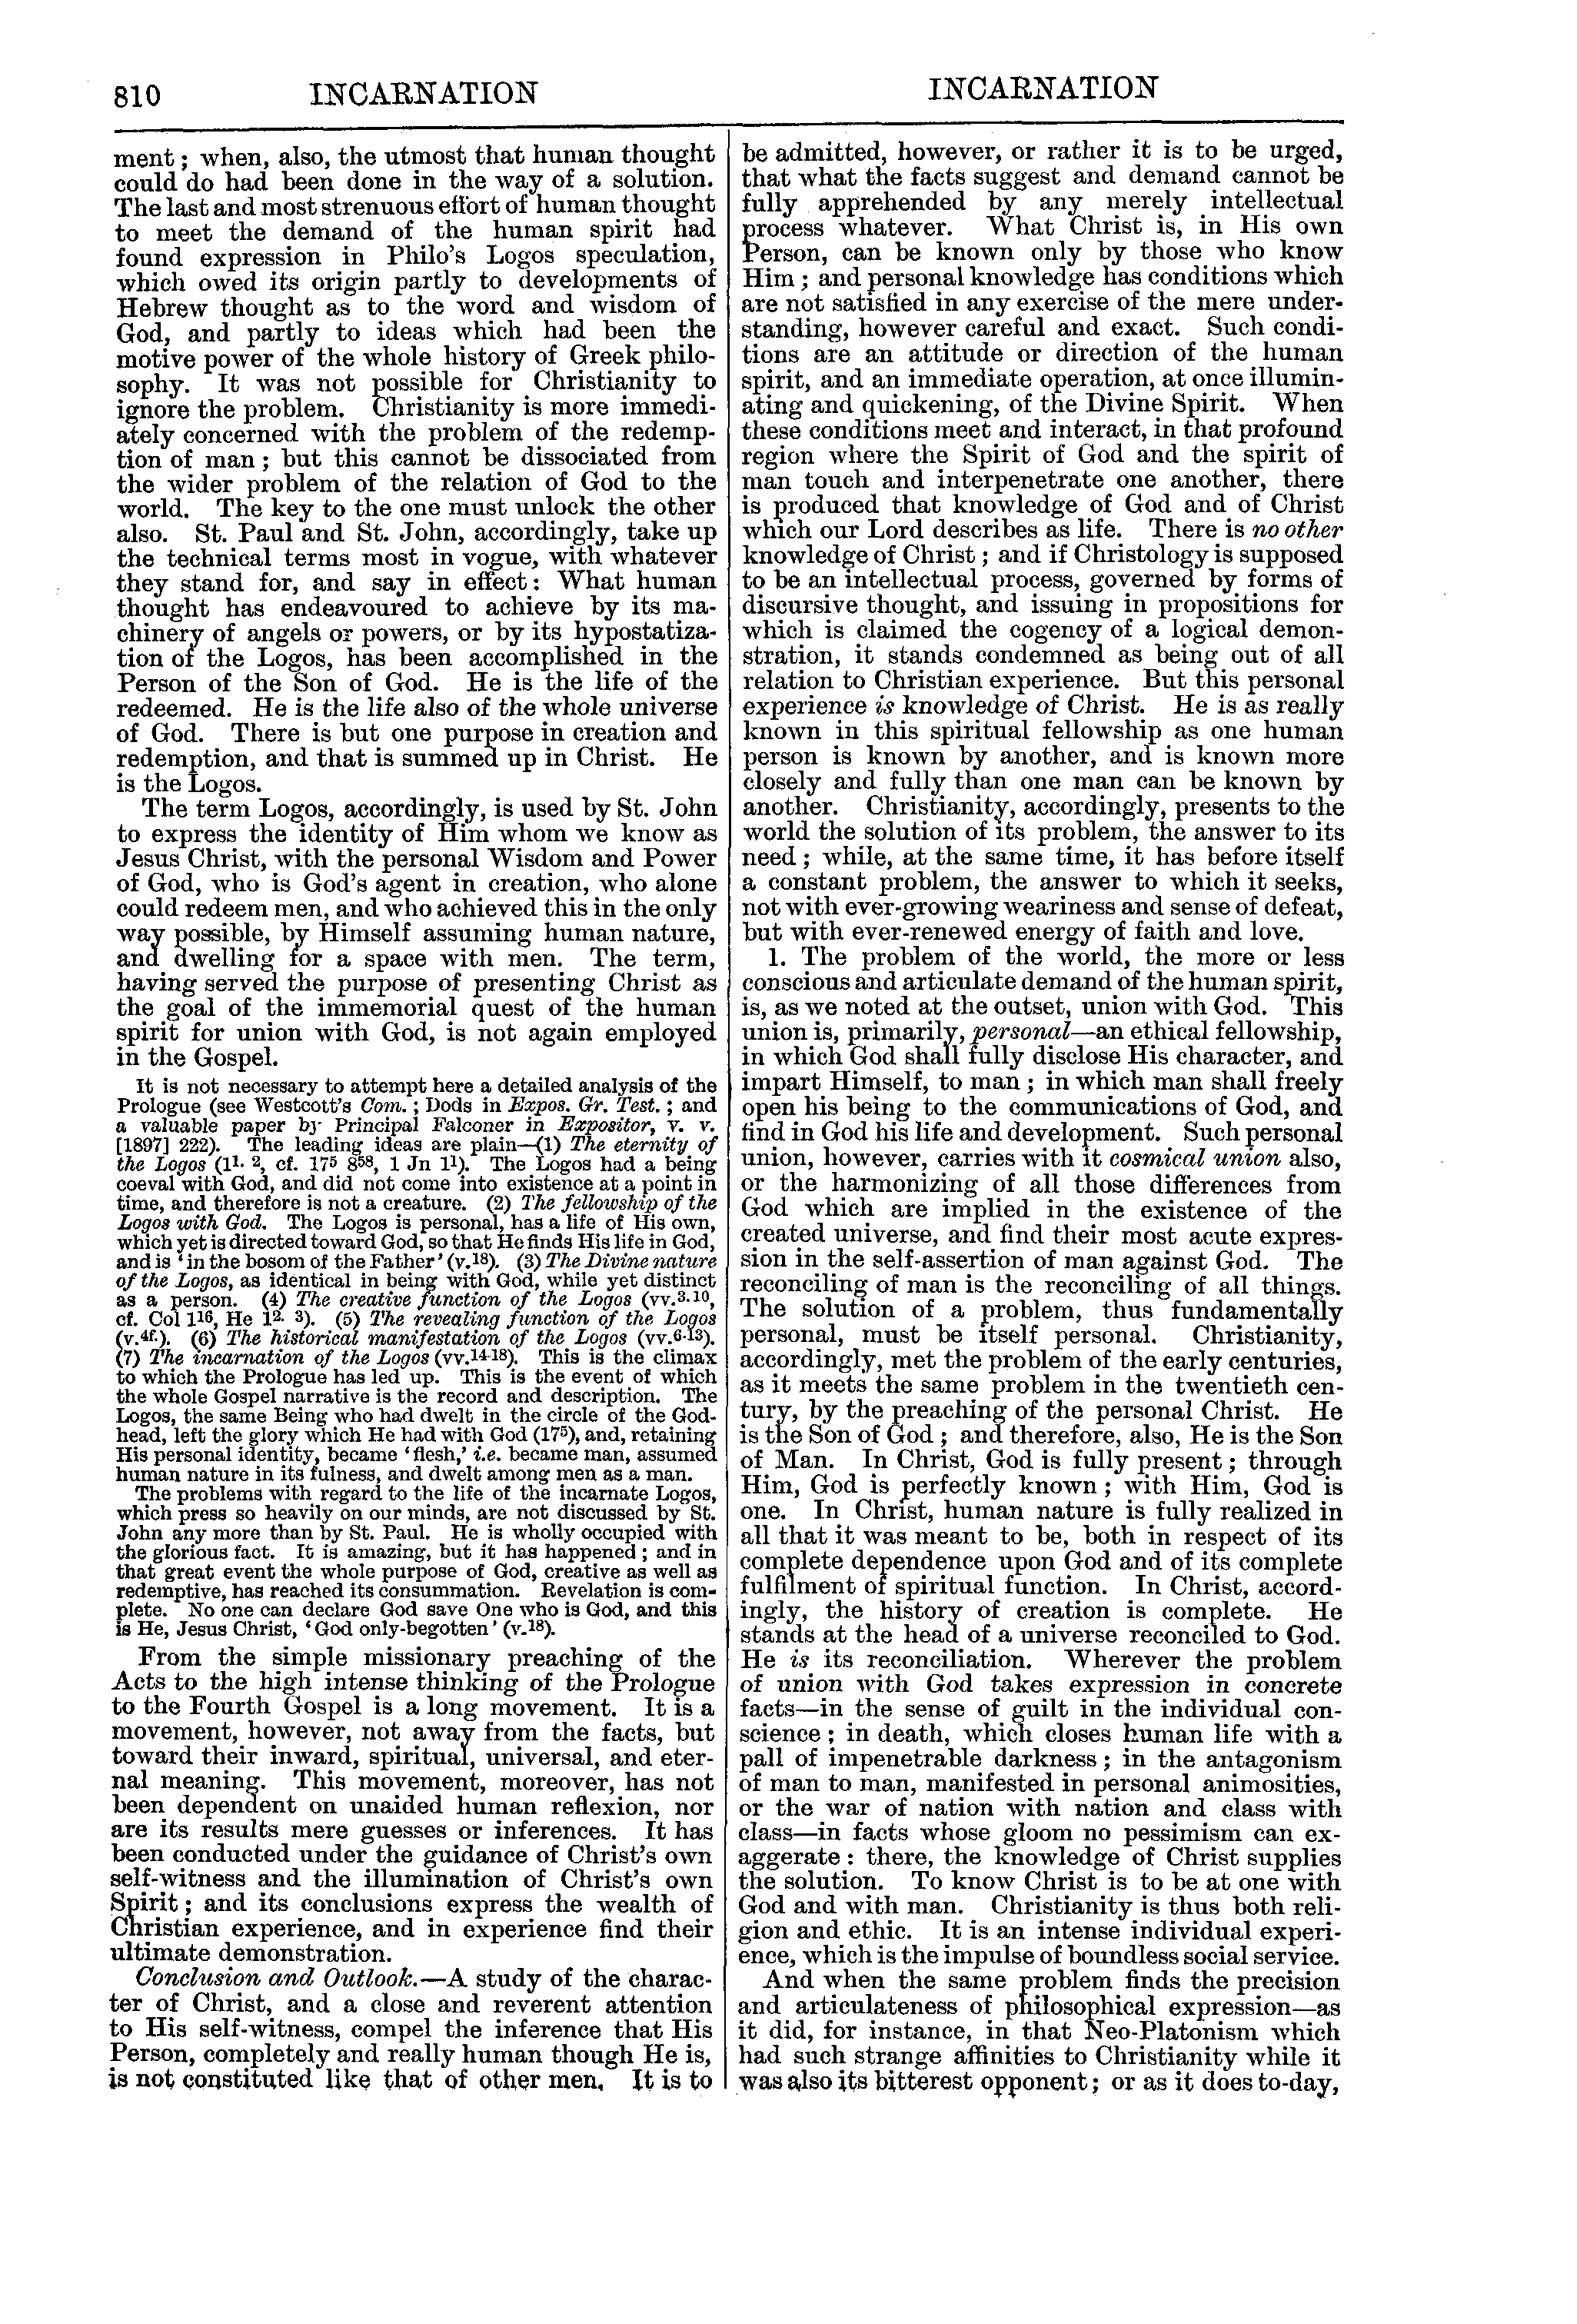 Image of page 810